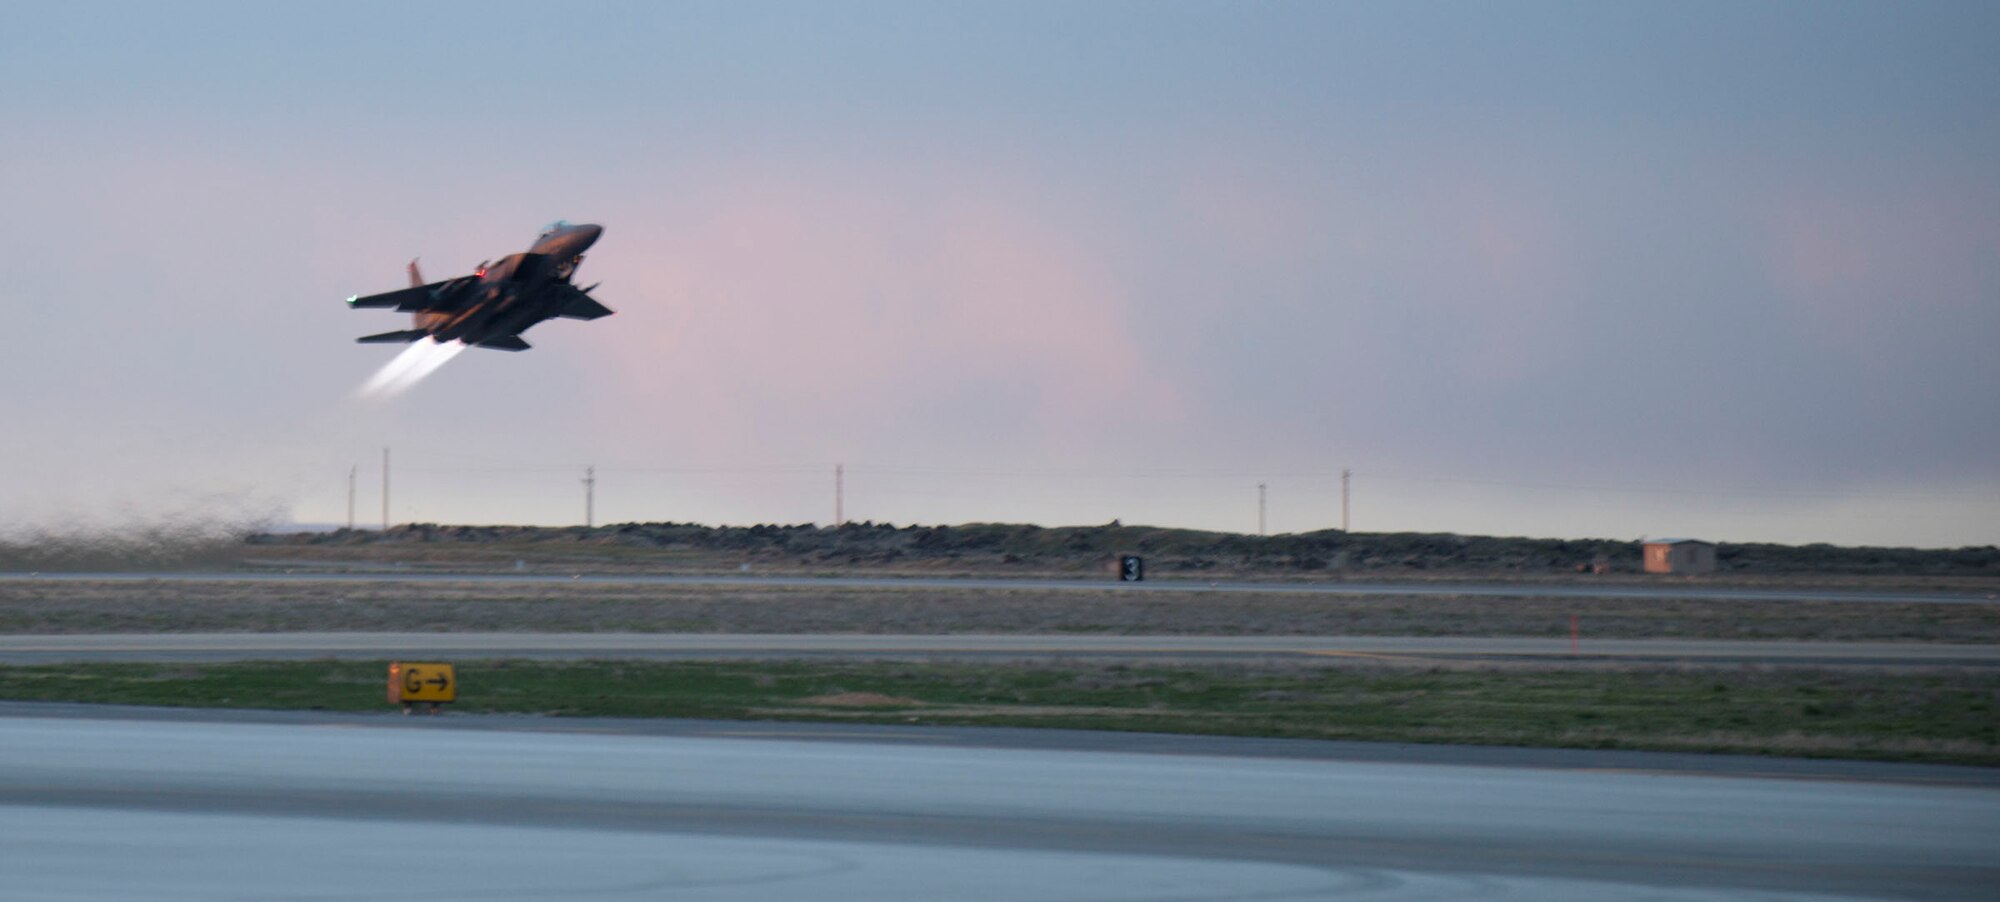 An F-15E Strike Eagle takes off at Mountain Home Air Force Base, Idaho, March 15, 2016. The first flight of the F-15E was made in July 1972. (U.S. Air Force photo by Senior Airman Malissa Lott/ RELEASED)